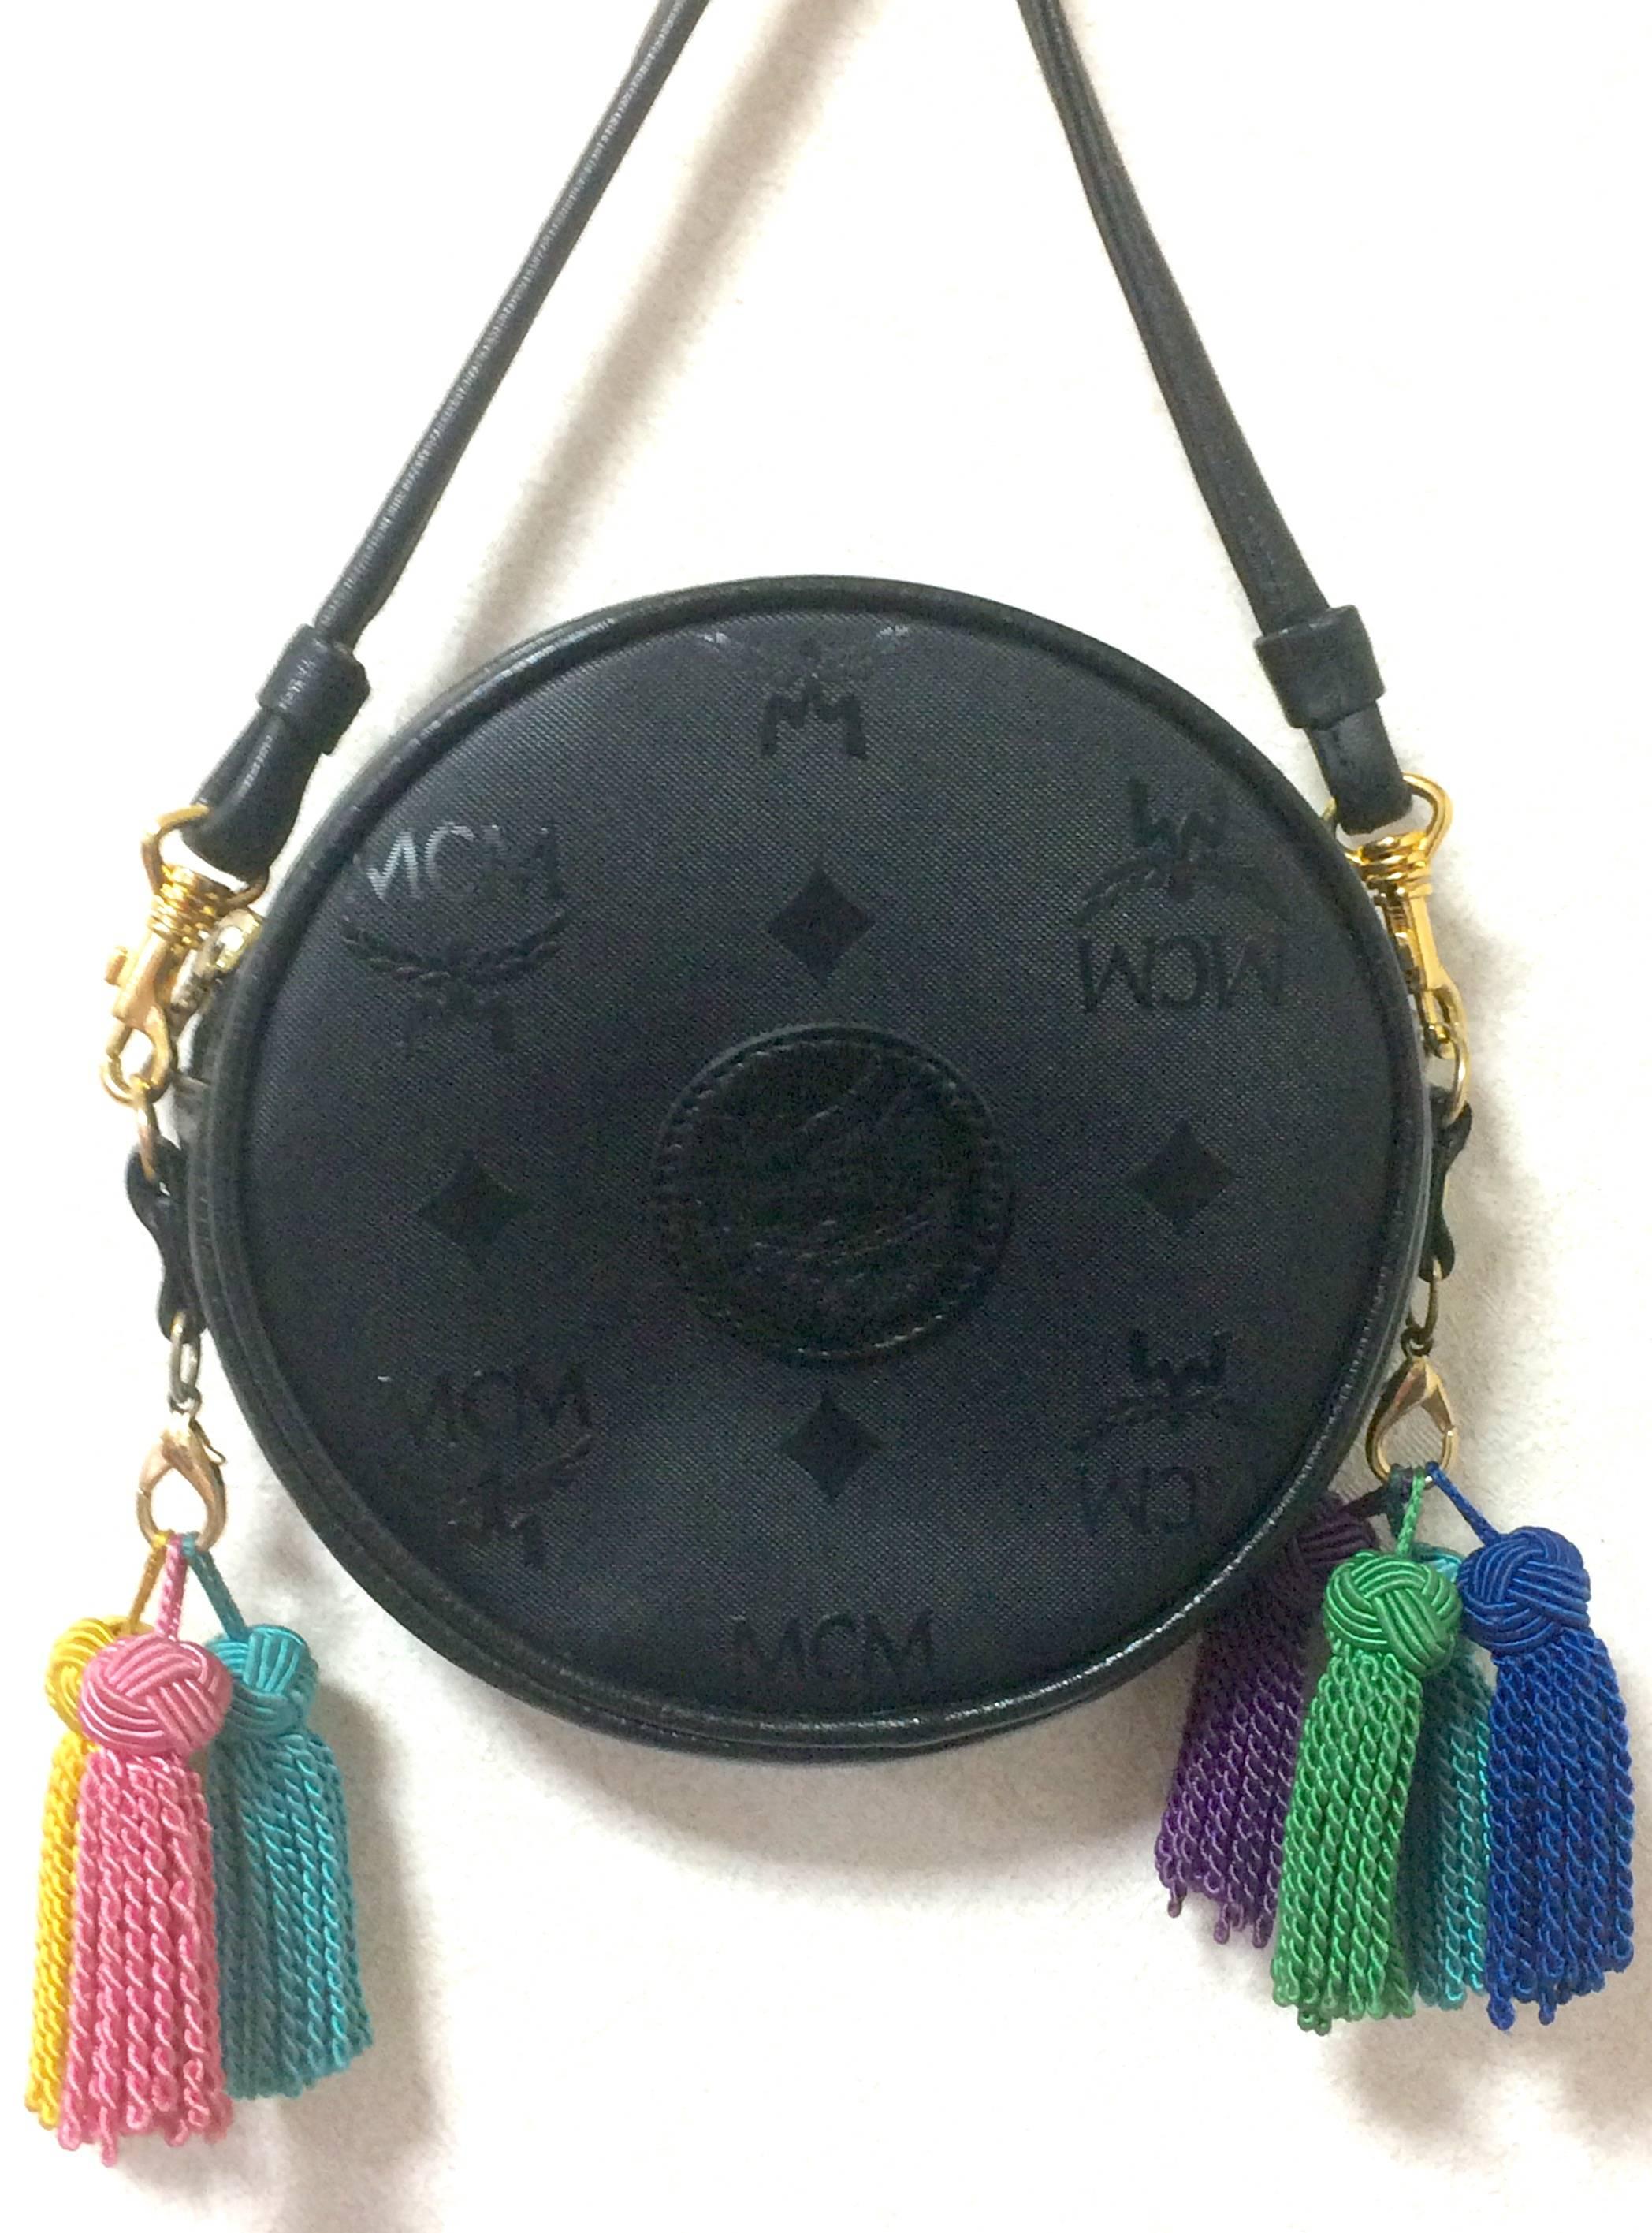 1980s. Vintage MCM black monogram Suzy Wong mini shoulder purse with multicolor fringes, designed by Michael Cromer. Made in West Germany.

Rare masterpiece you must have!

MCM has been back in the fashion trend again!!
Now it's considered to be one